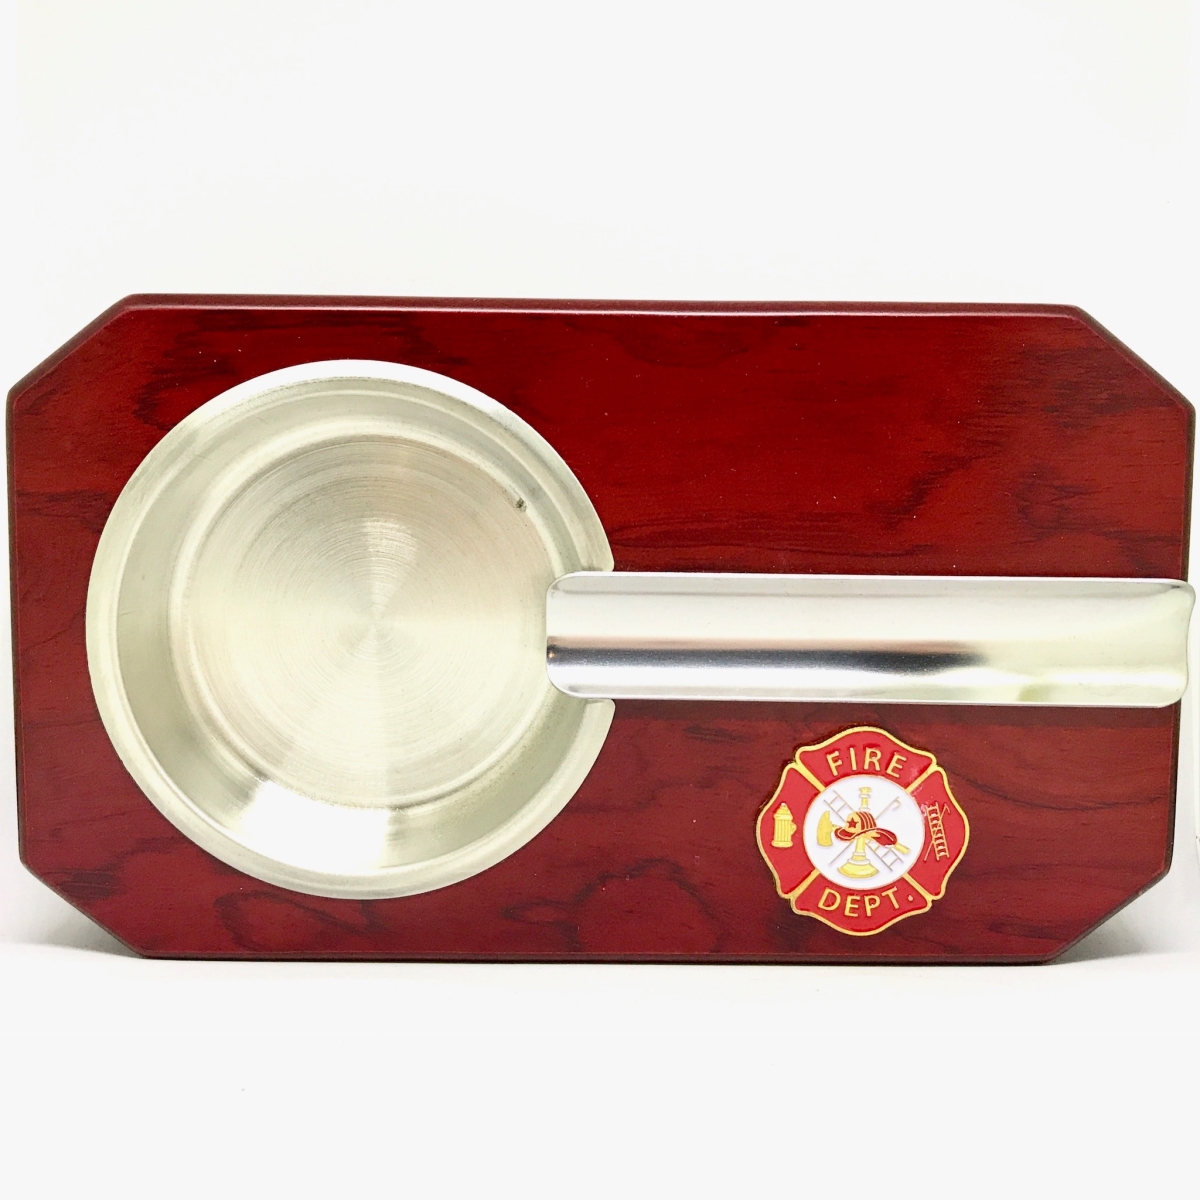 Picture of Cigar Cutters by Jim AT-FMN3 Firemans Cross Cigar Ashtray - Enamel